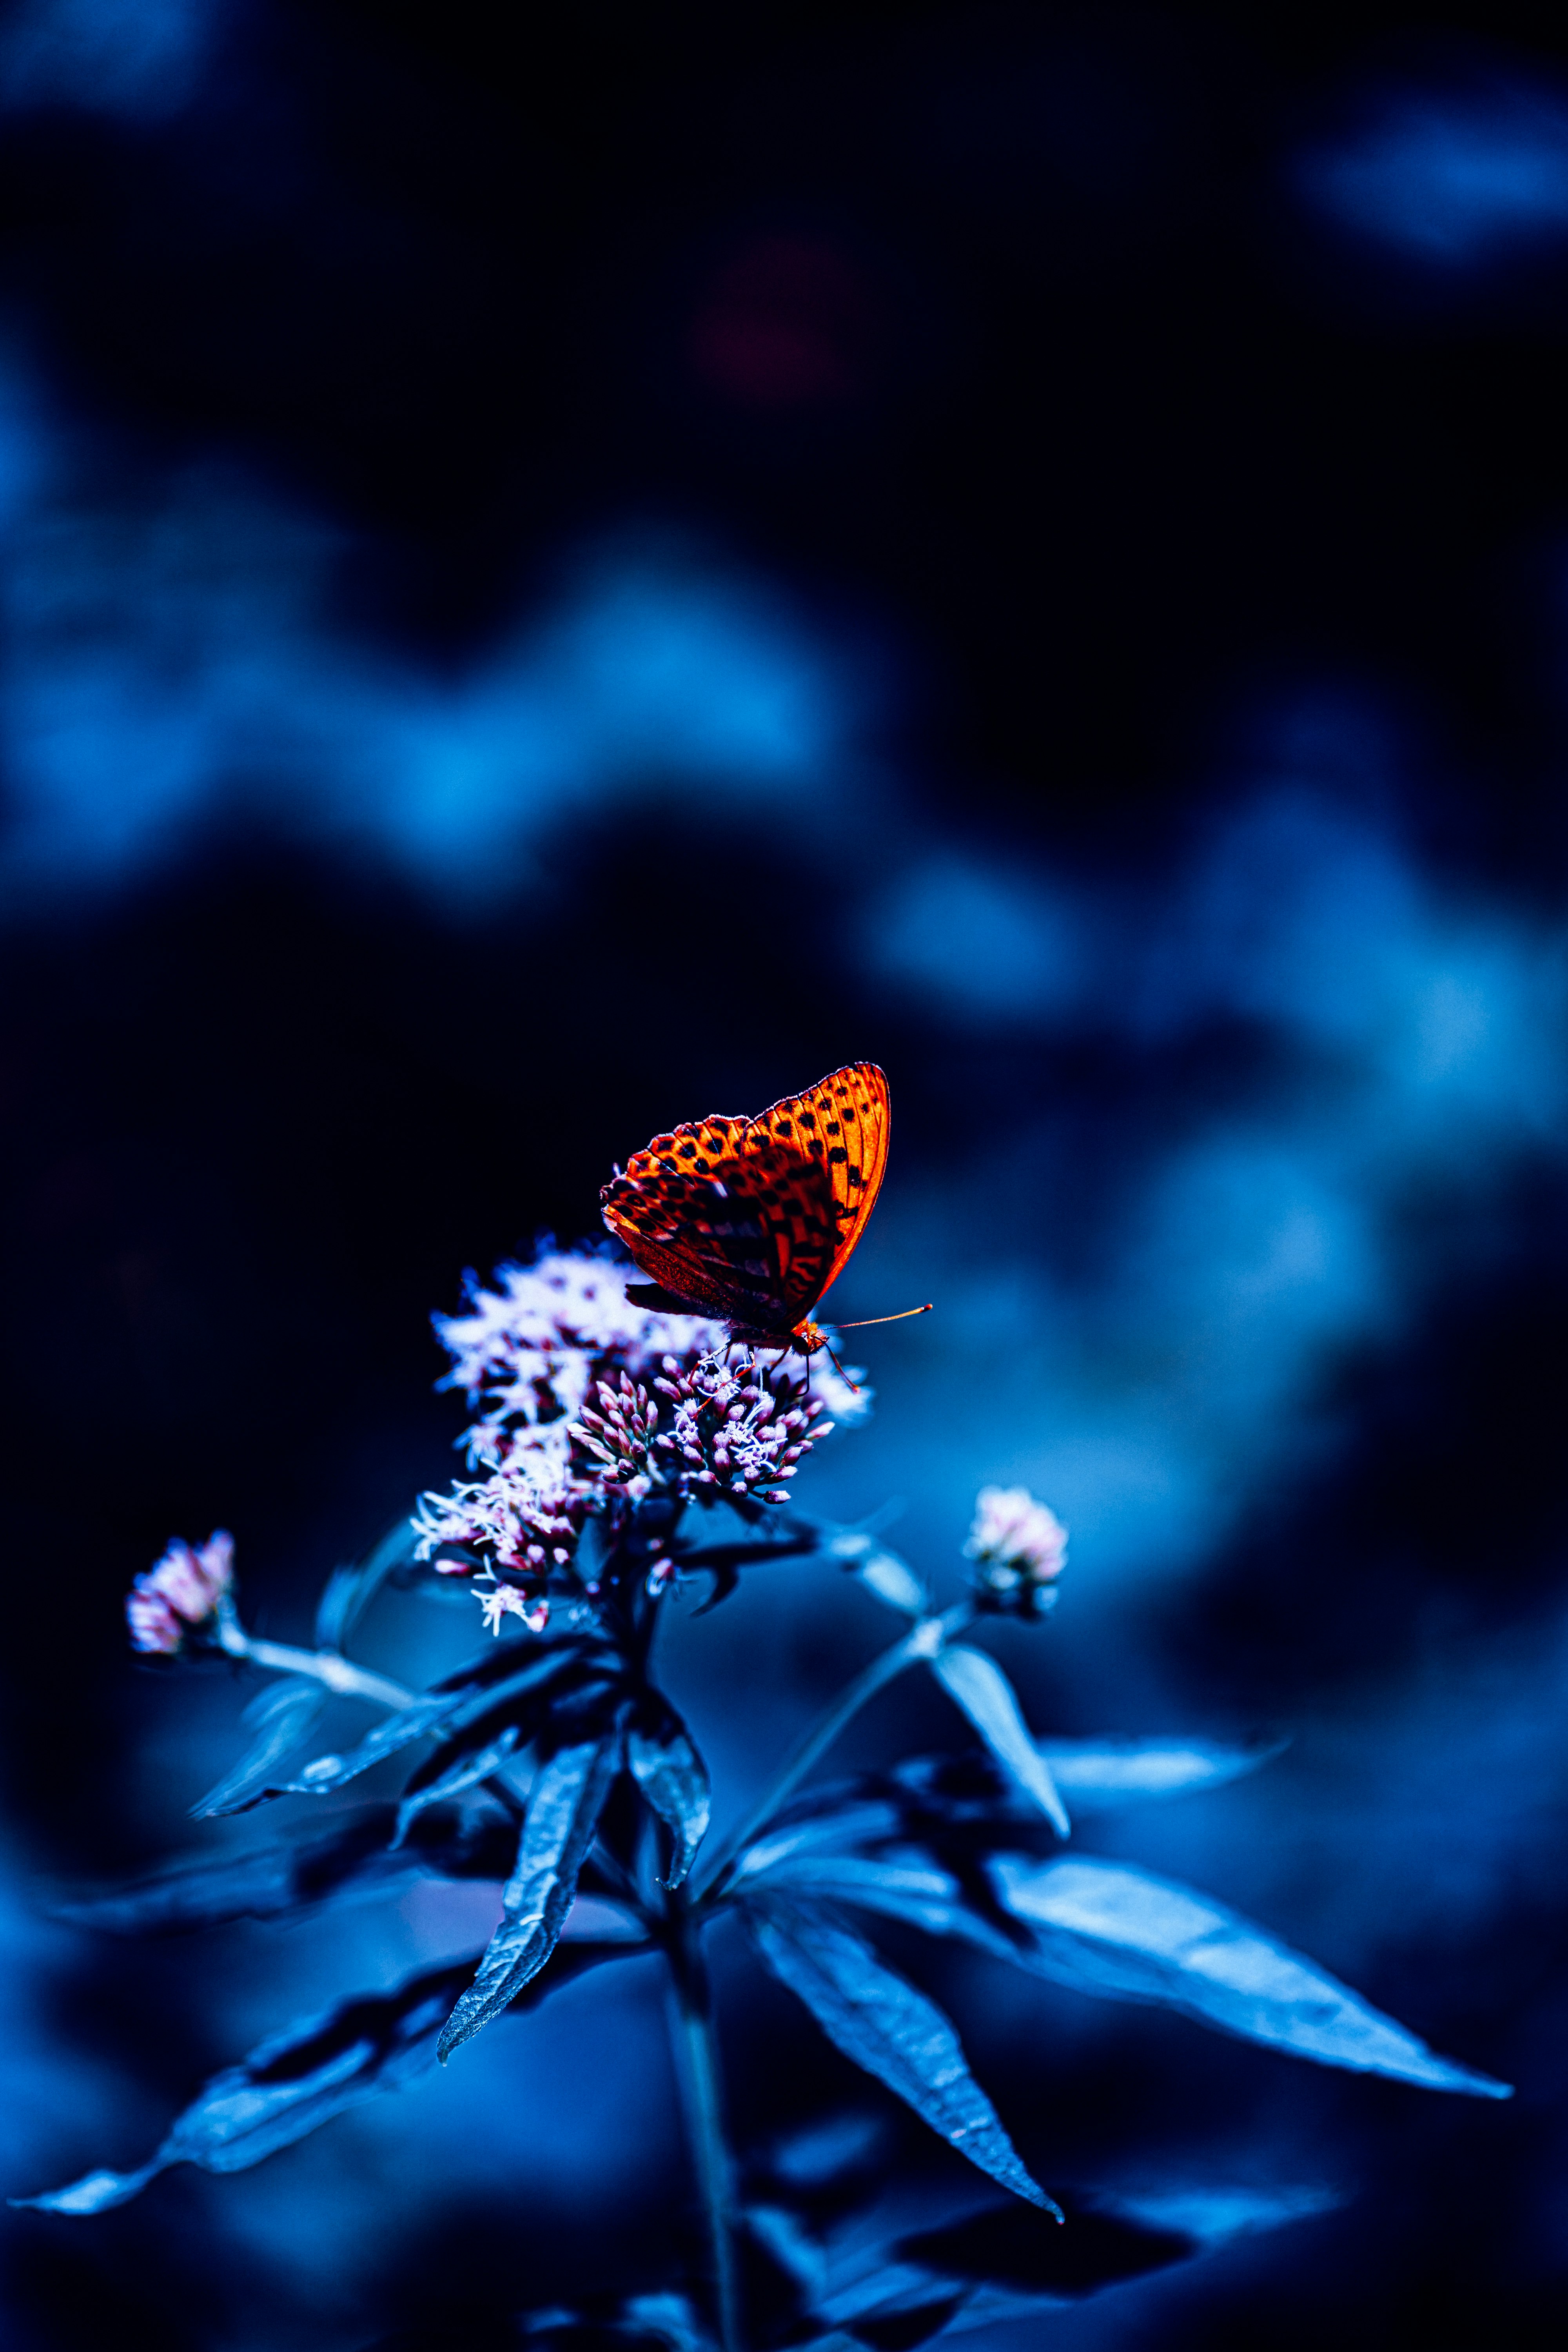 brown butterfly perched on blue flower in close up photography during daytime